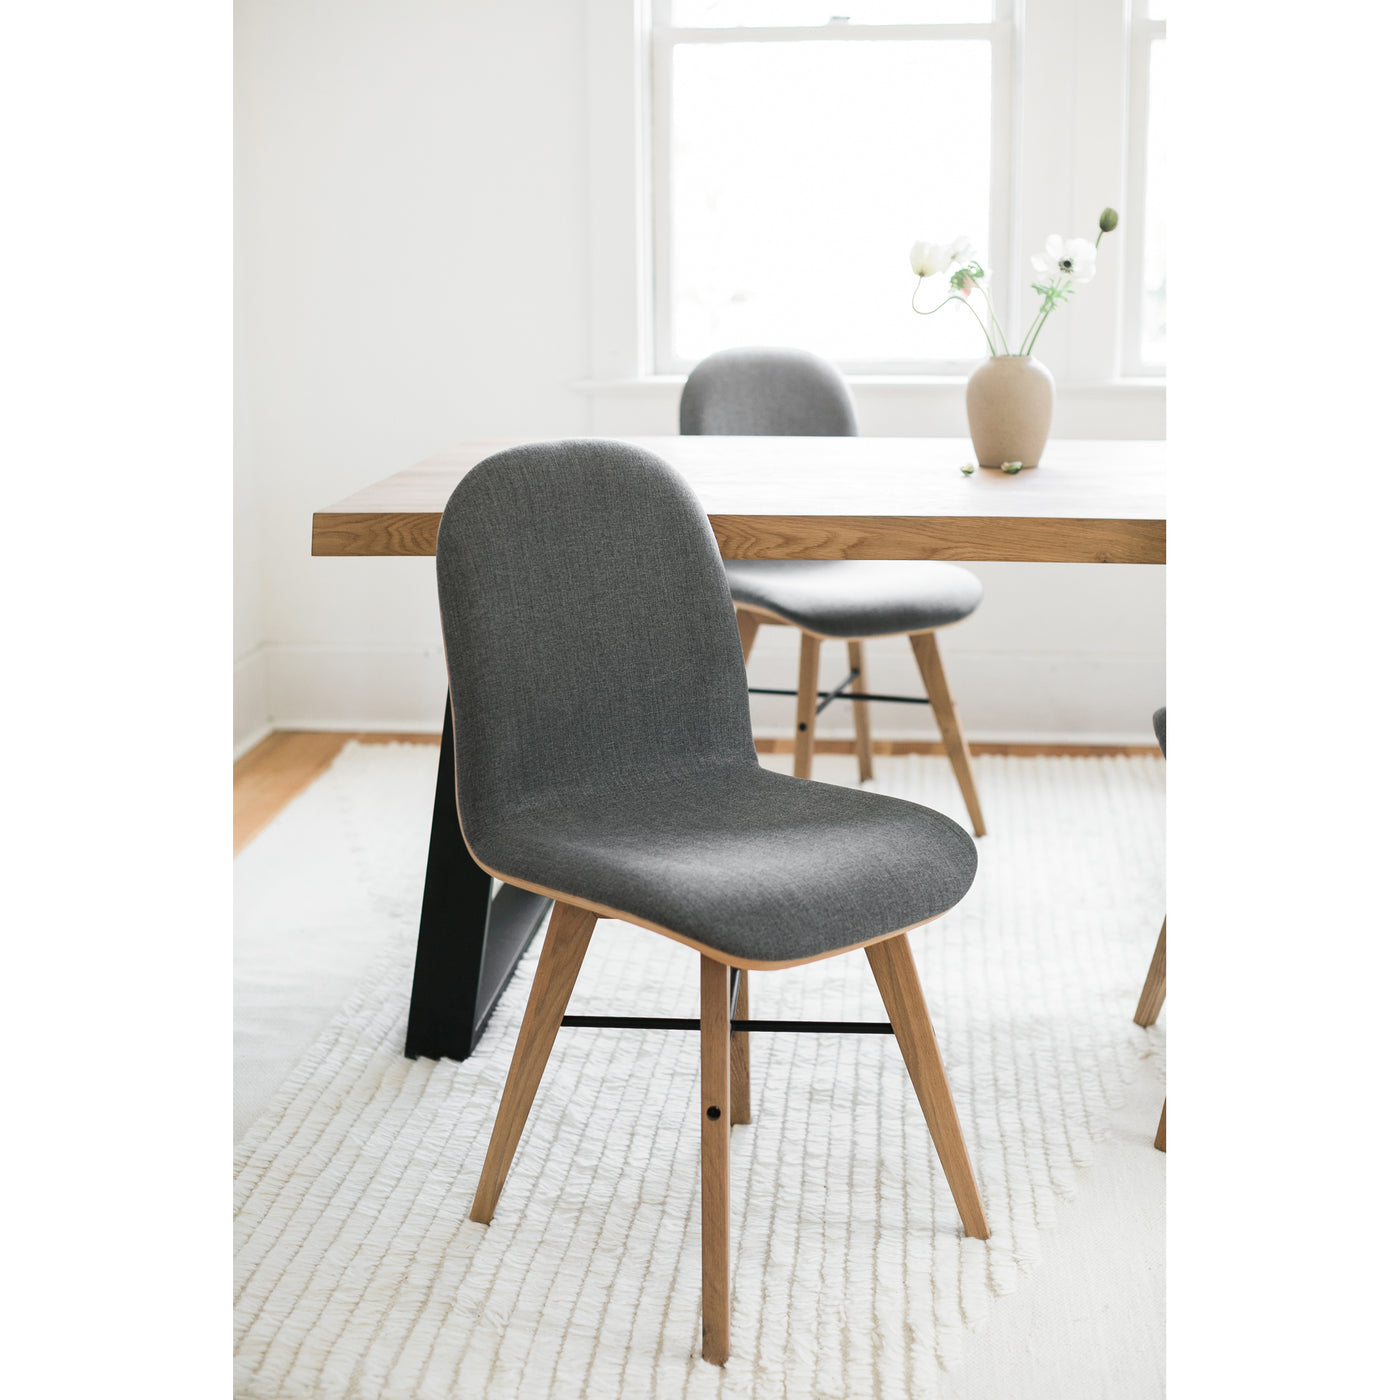 The Napoli is a warm addition to your dining room table or work desk. Upholstered in smooth polyester fabric, it adds a wa...